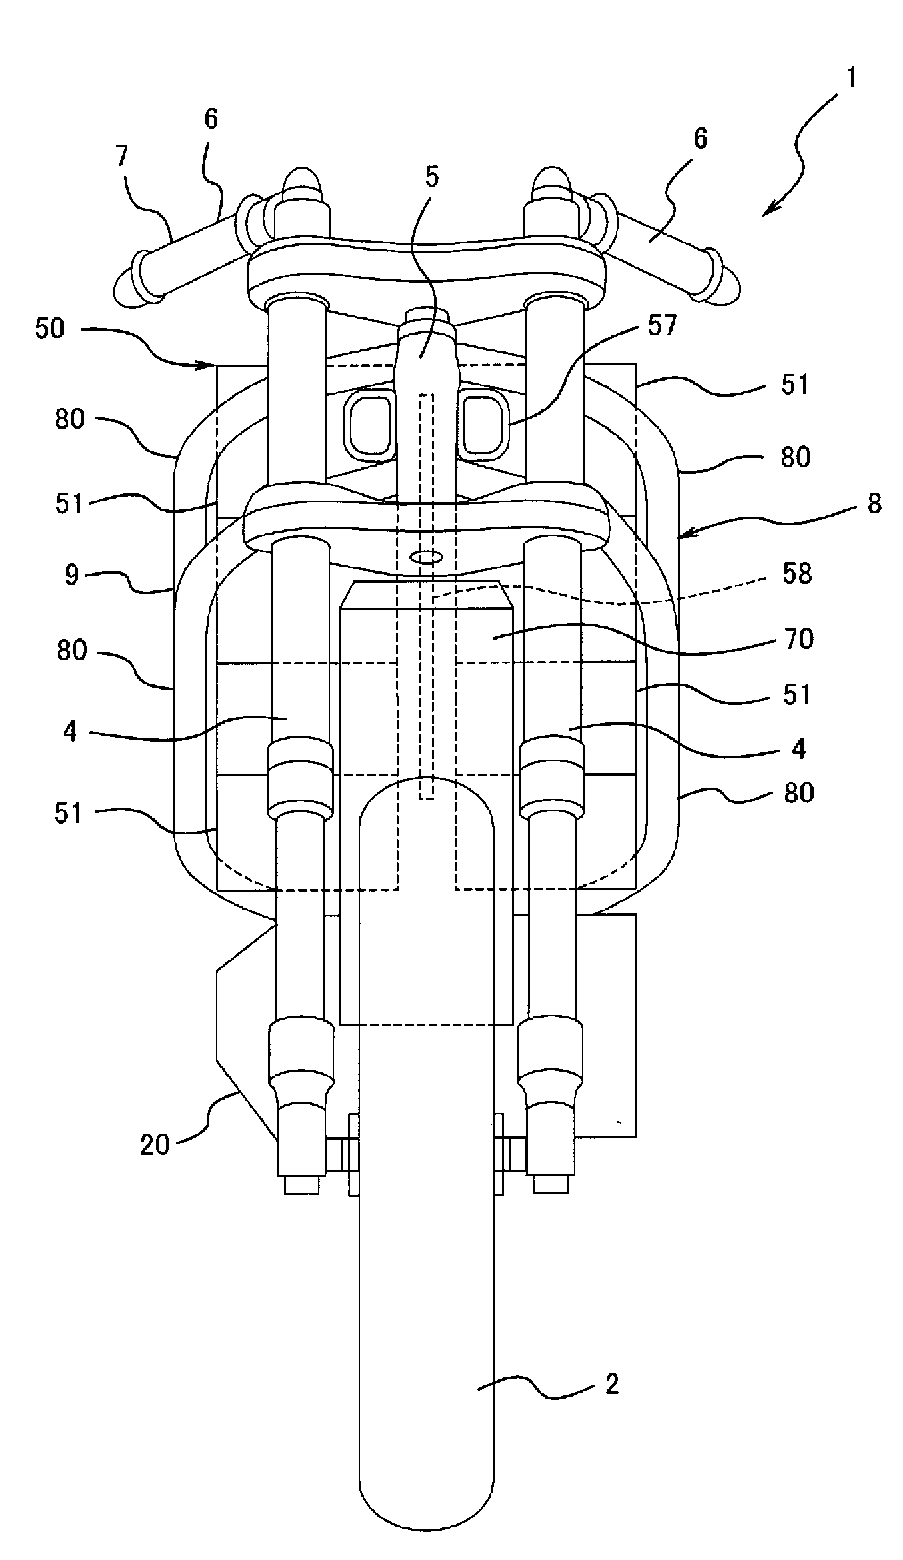 Mounting structure for accumulator devices in electric vehicle